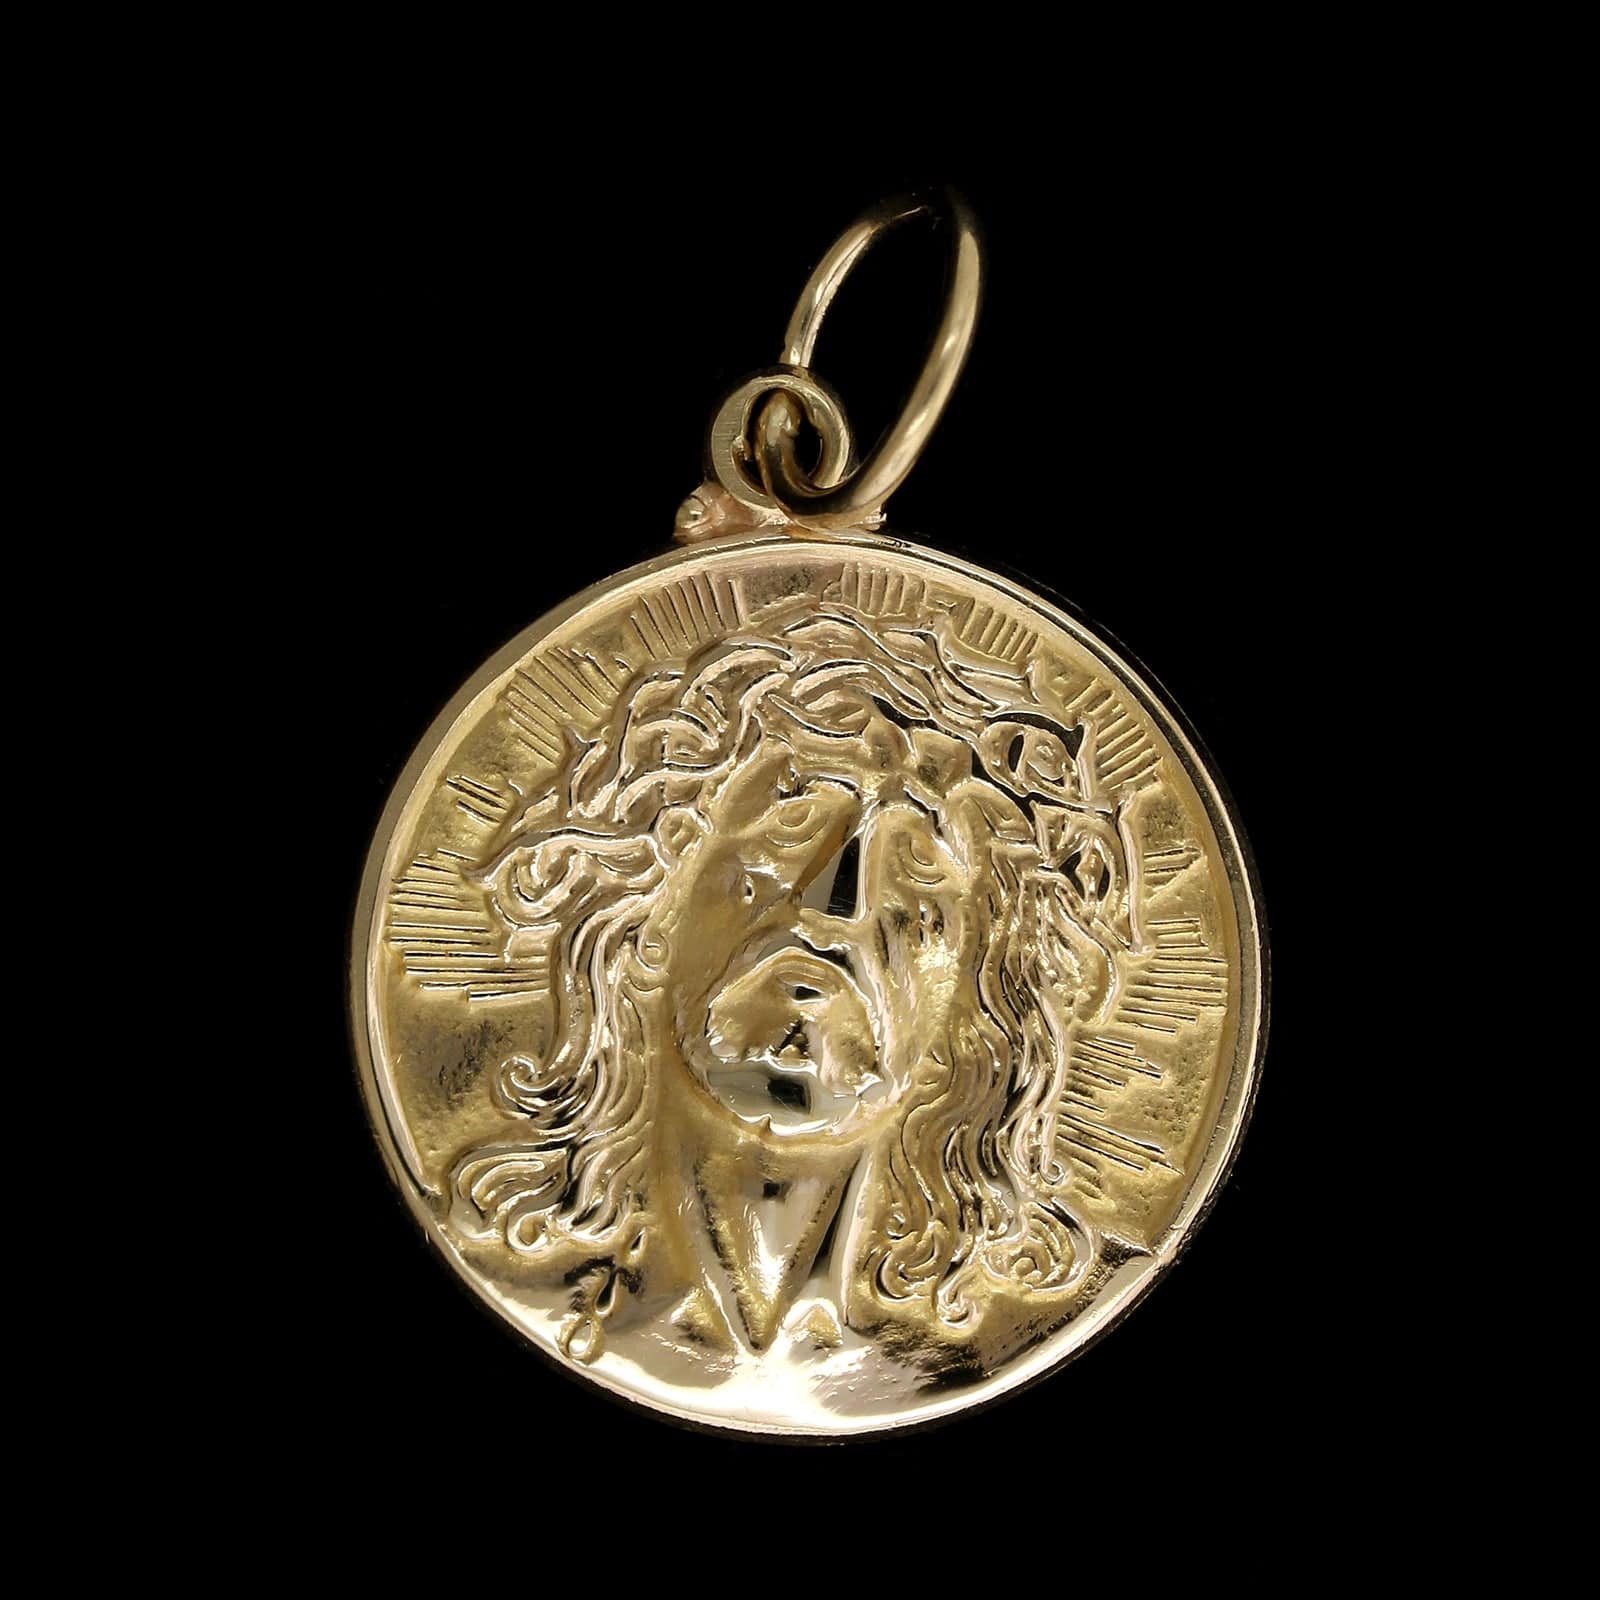 Real 14K Yellow Gold Jesus Pendant 3 Head Charm for Chain